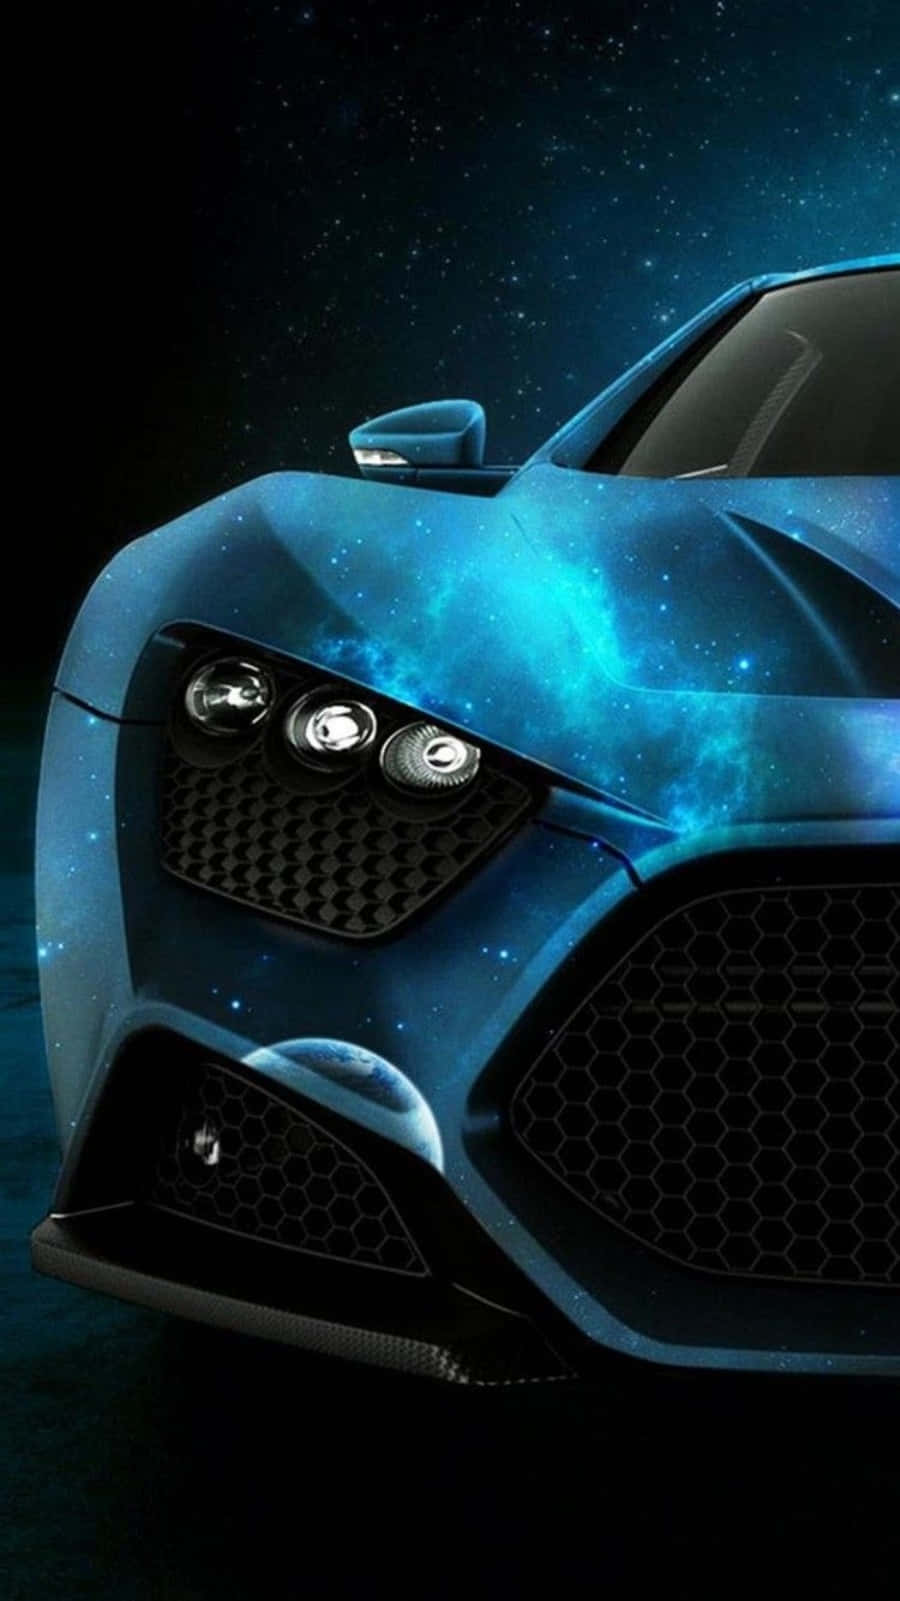 A Blue Sports Car With A Space Background Wallpaper